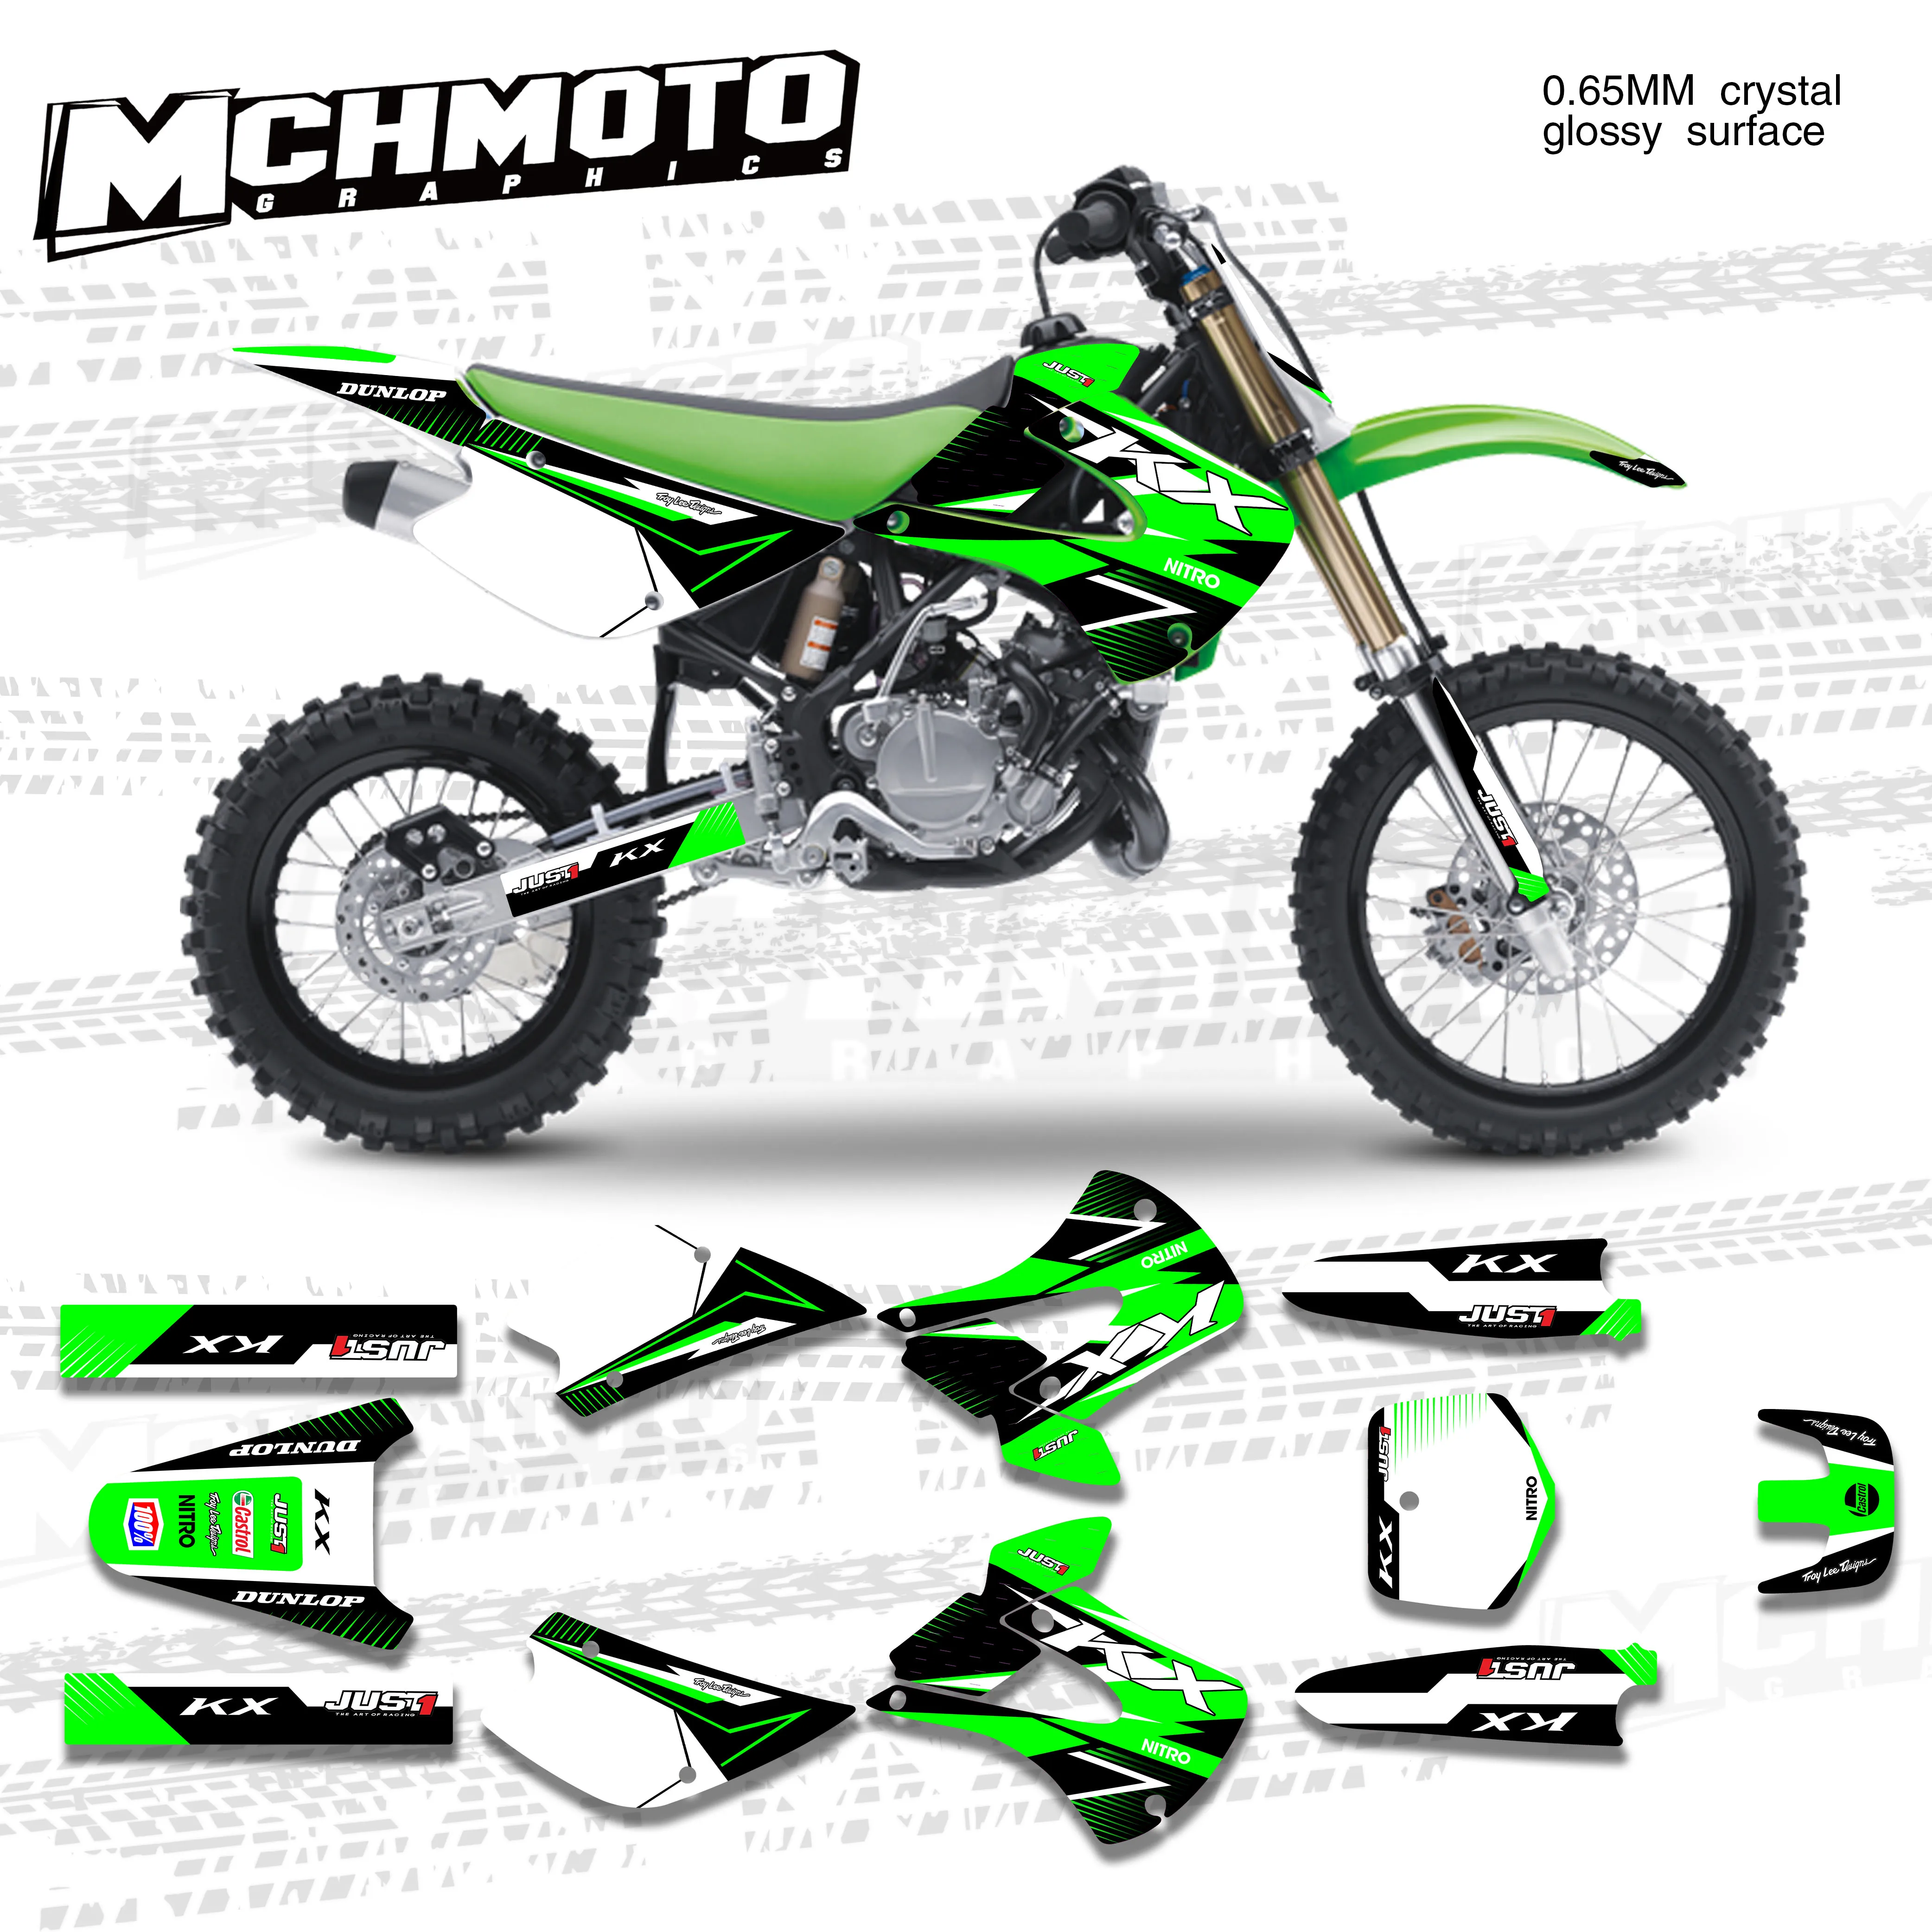 Kx85-FMF-Racing-Exhaust-Graphic-Kit-01-12-Green-Graphics-Decal-Sticker-MX-Kx-85 Kx85-FMF-Racing-Exhaust-Graphic-Kit-01-12-Green-Graphics-Decal-Sticker-MX-Kx-85 Have one to sell Sell now Details about Kx85 FMF Racing Exhaust Graphic Kit 01-12 Green Graphic 